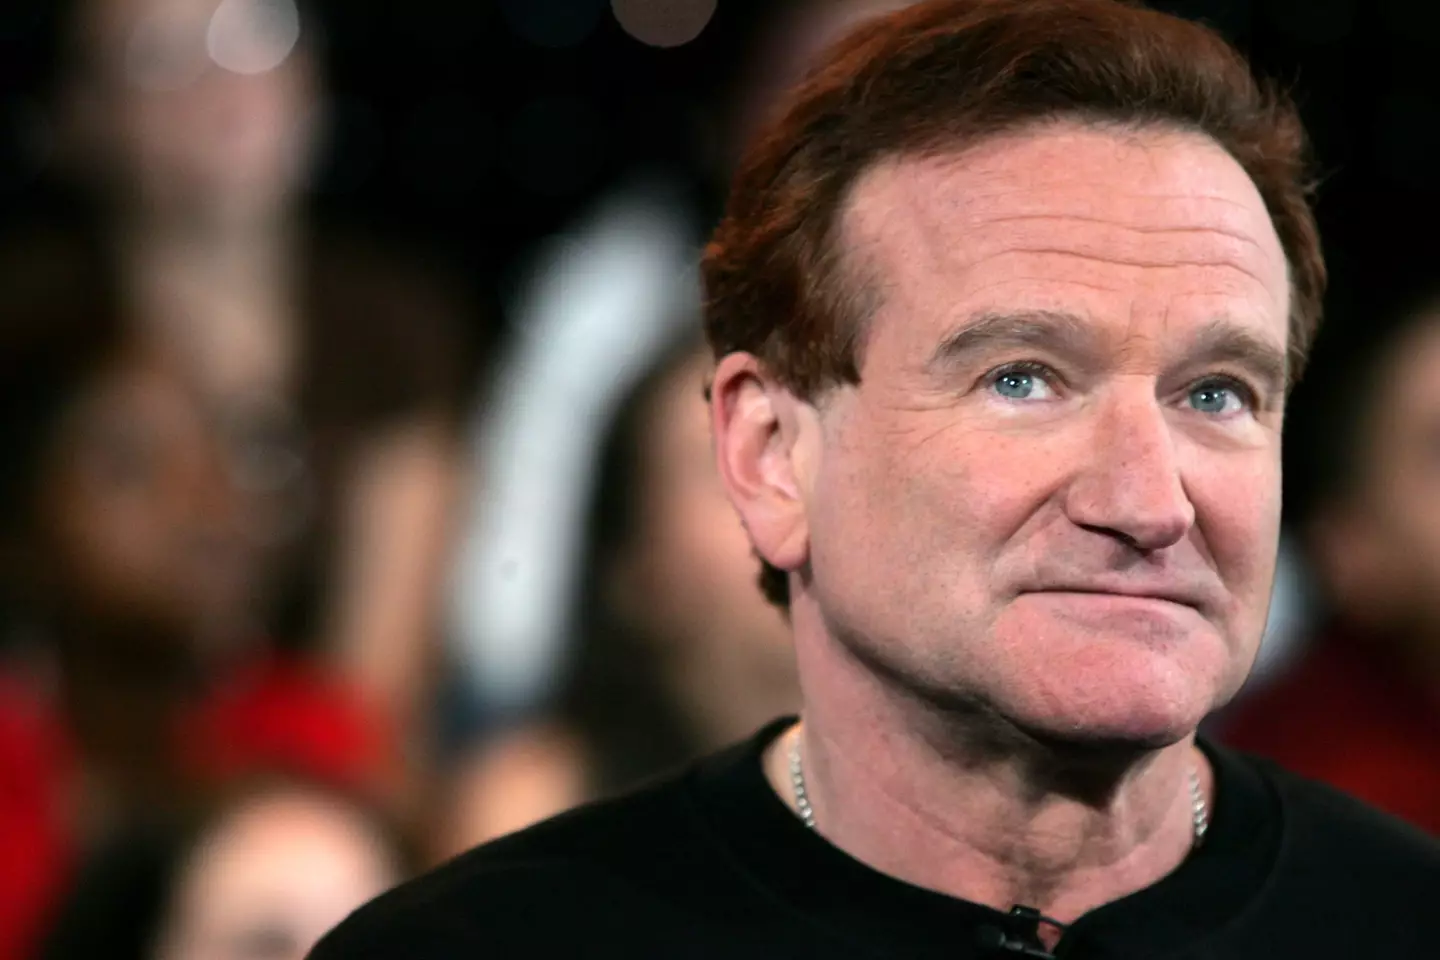 Robin Williams fans say Bicentennial Man is one of his best performances.